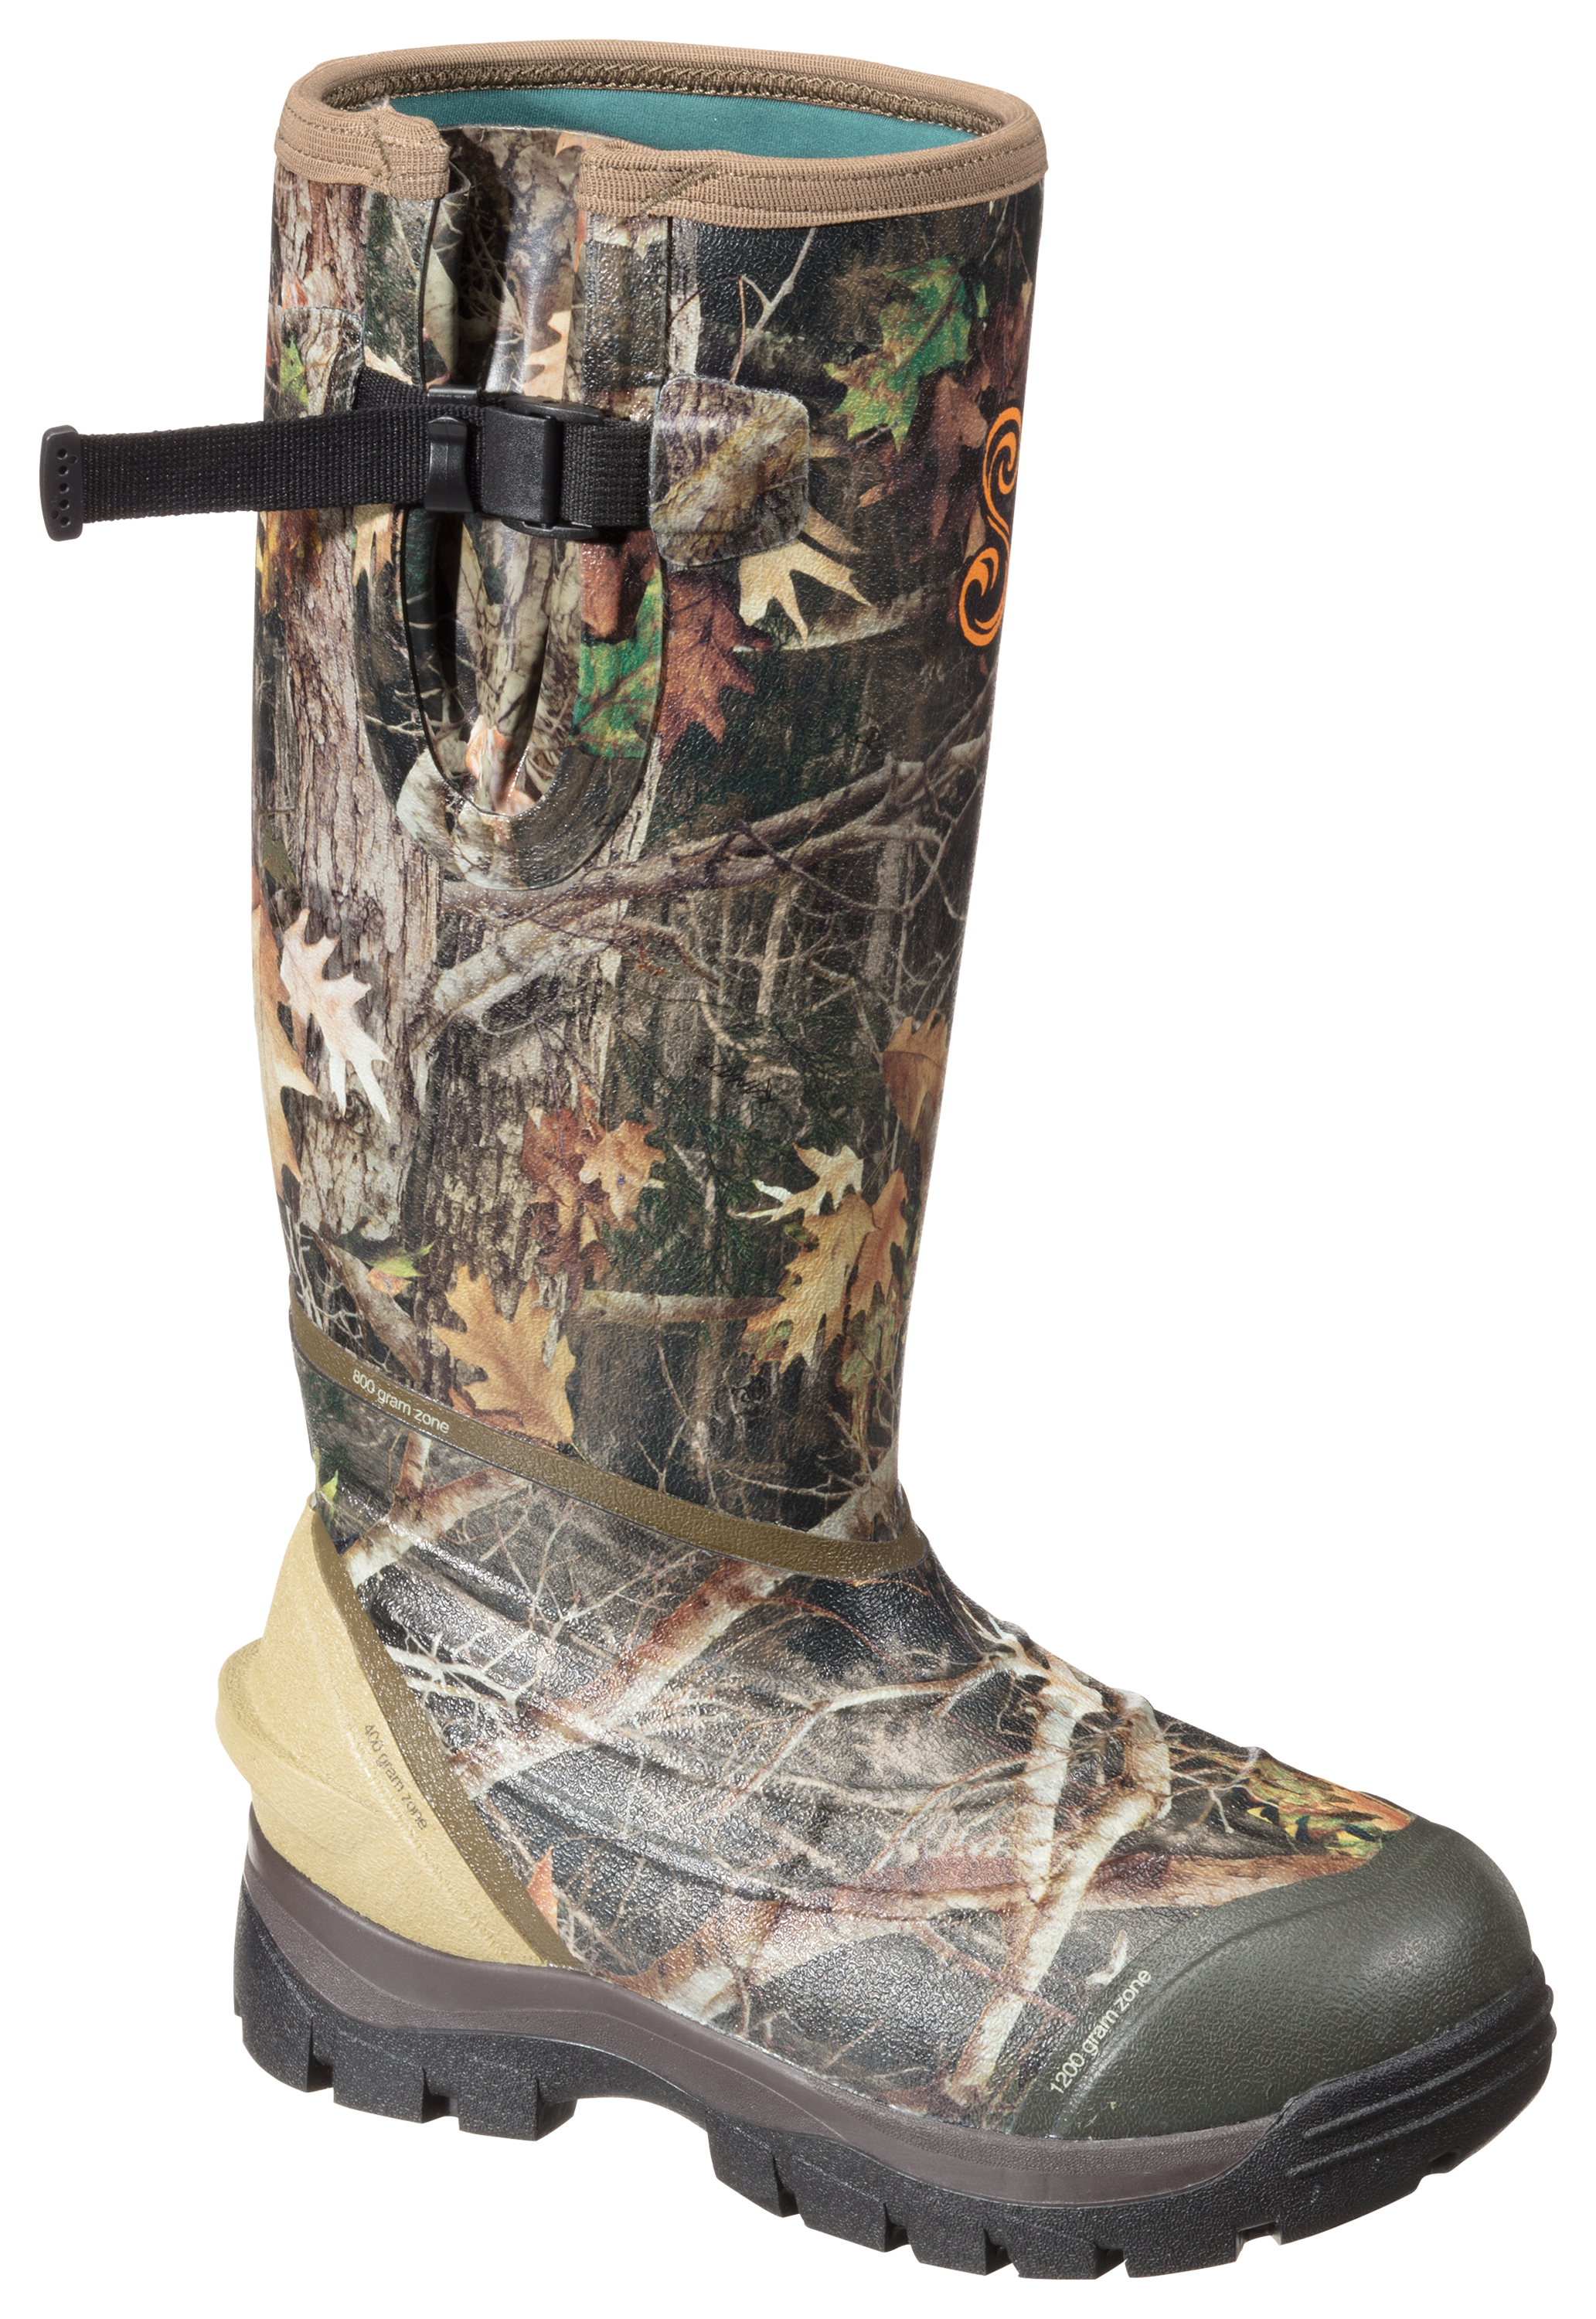 She Outdoor Zoned Comfort Trac Insulated Rubber Boots for Ladies - TrueTimber Strata - 8M